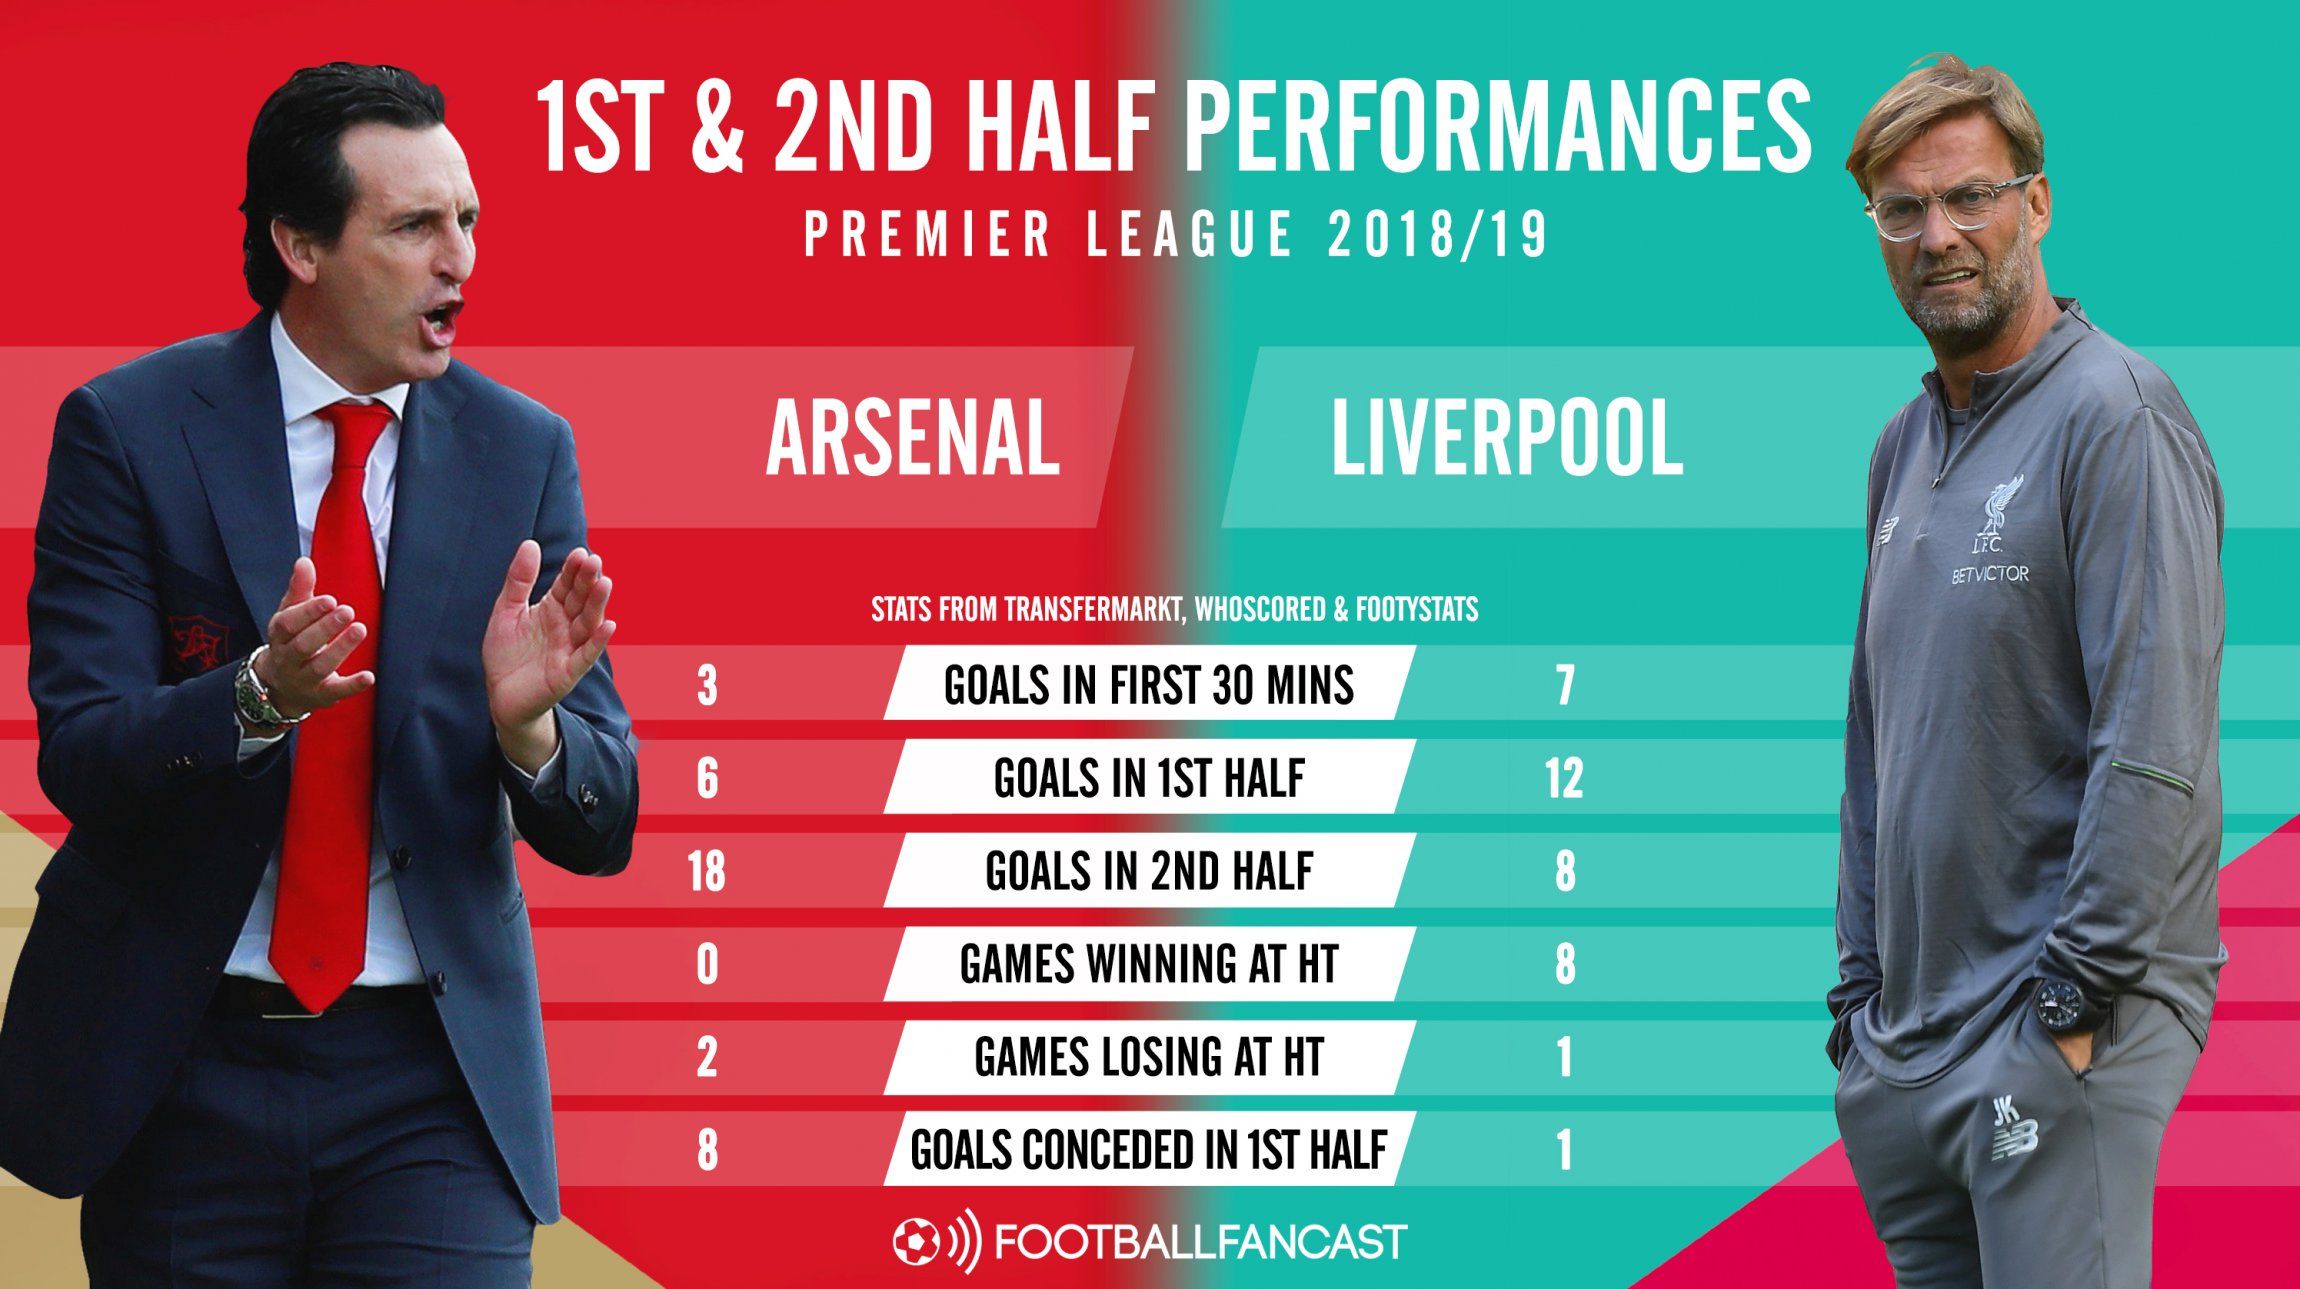 Arsenal vs Liverpool - first and second half performances